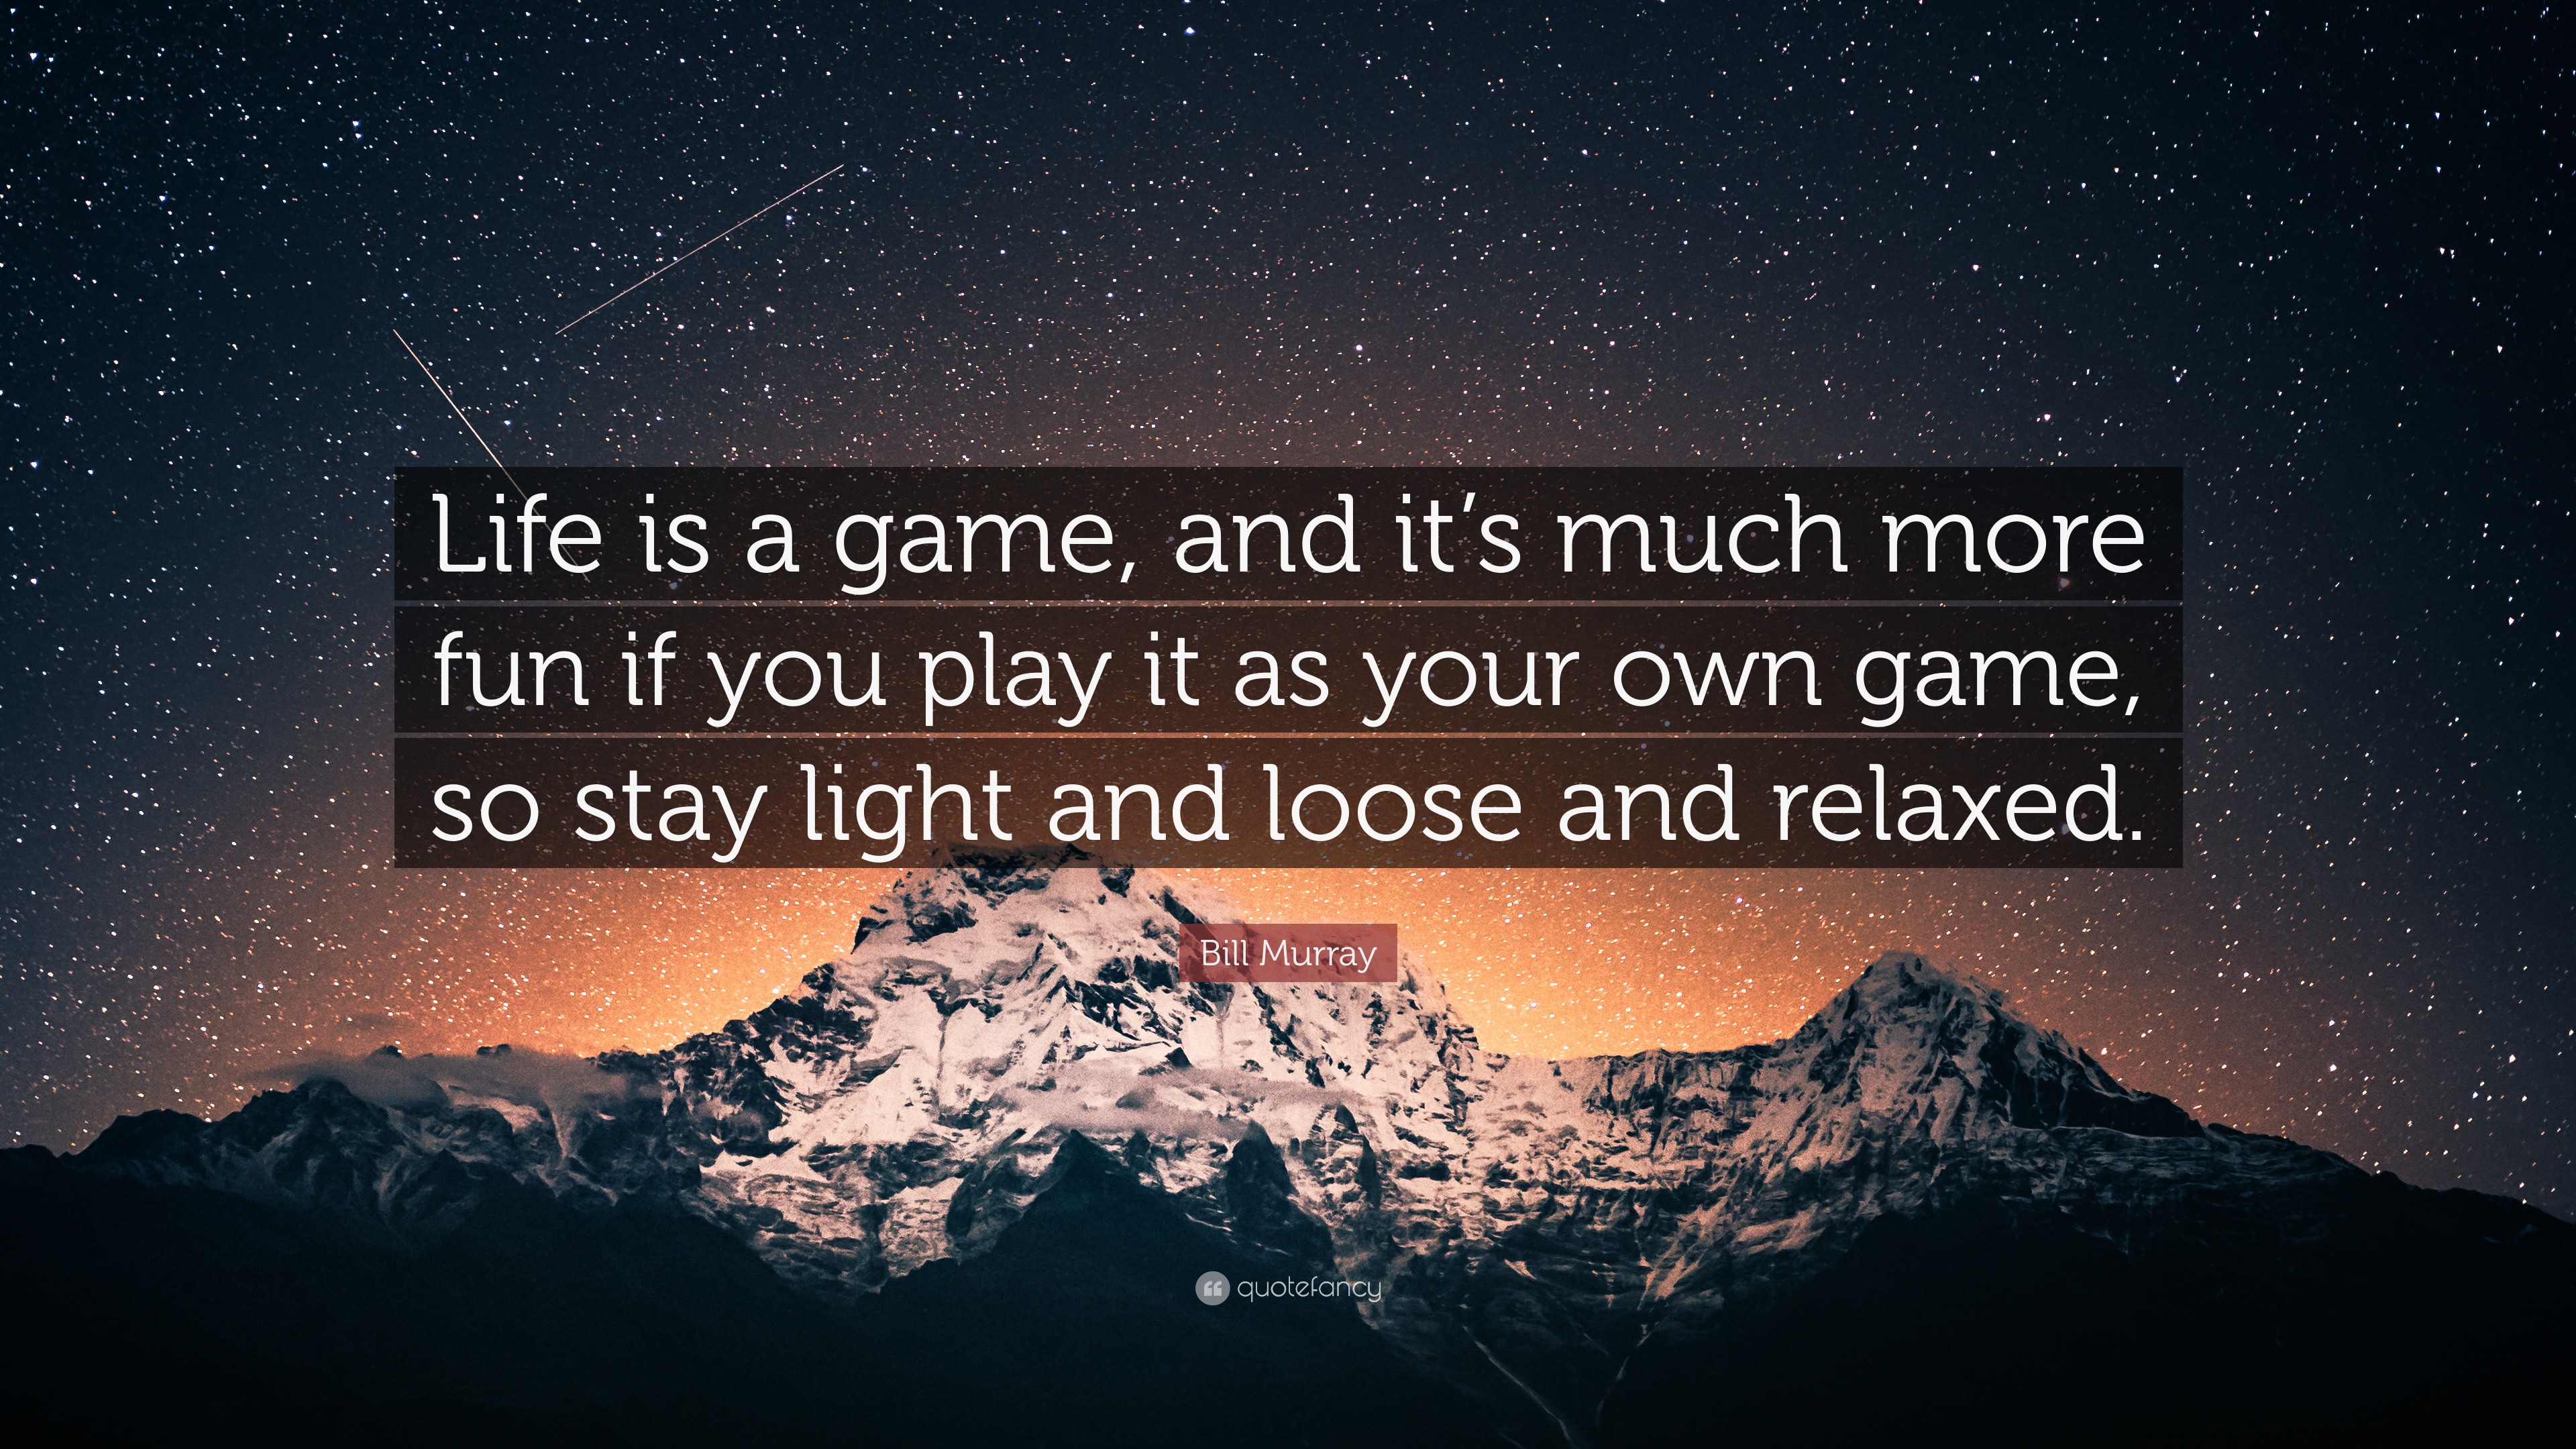 If life is a game, you will have to play it really well.